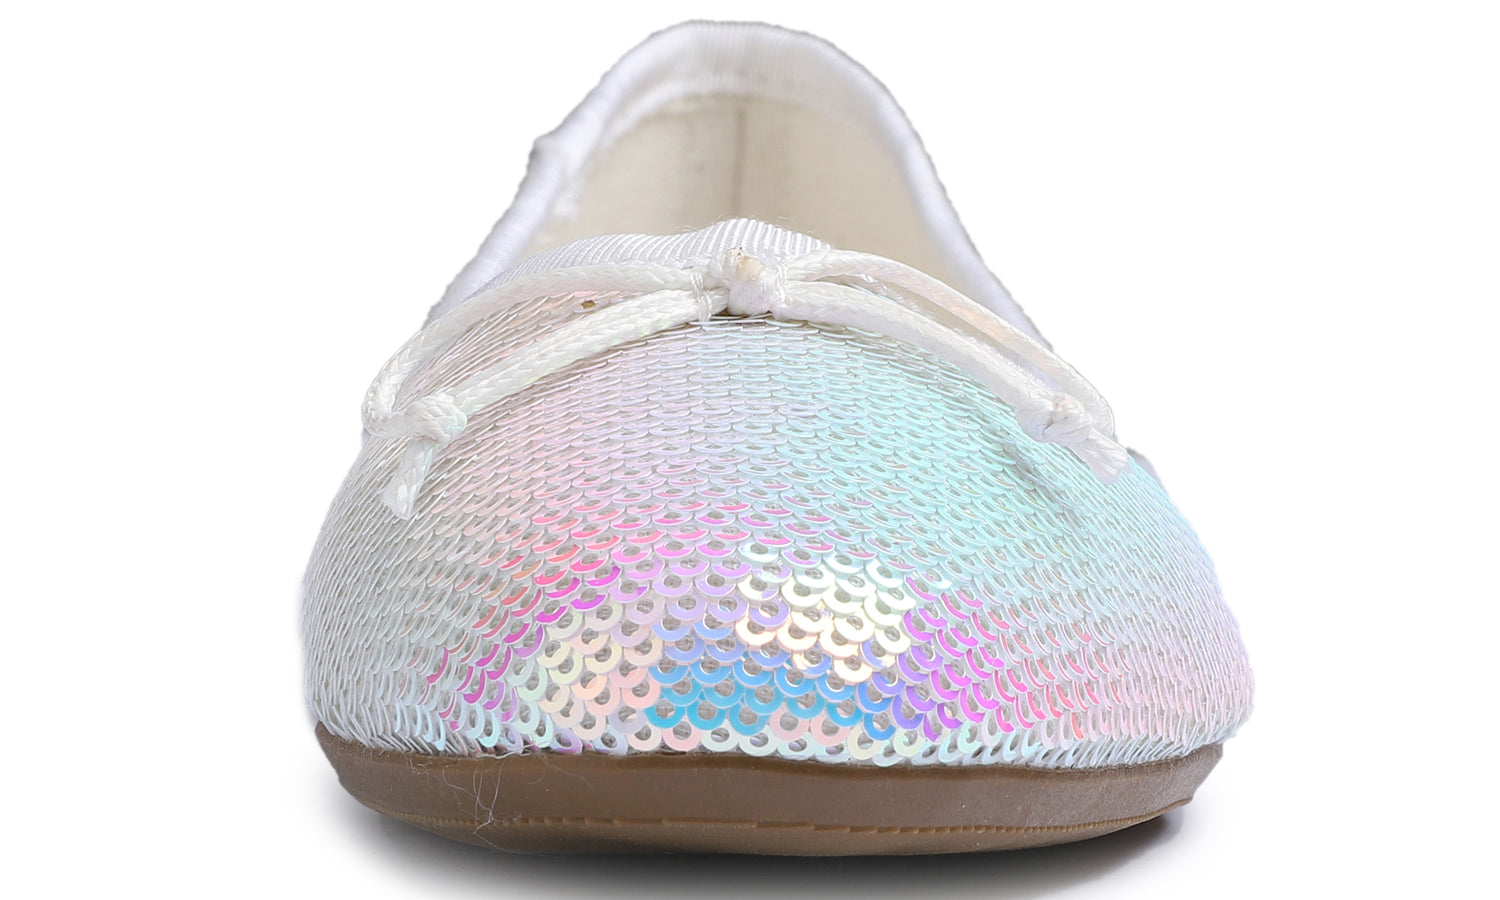 Feversole Women's Sparkle Memory Foam Cushioned Colorful Shiny Ballet Flats AB White Sequin